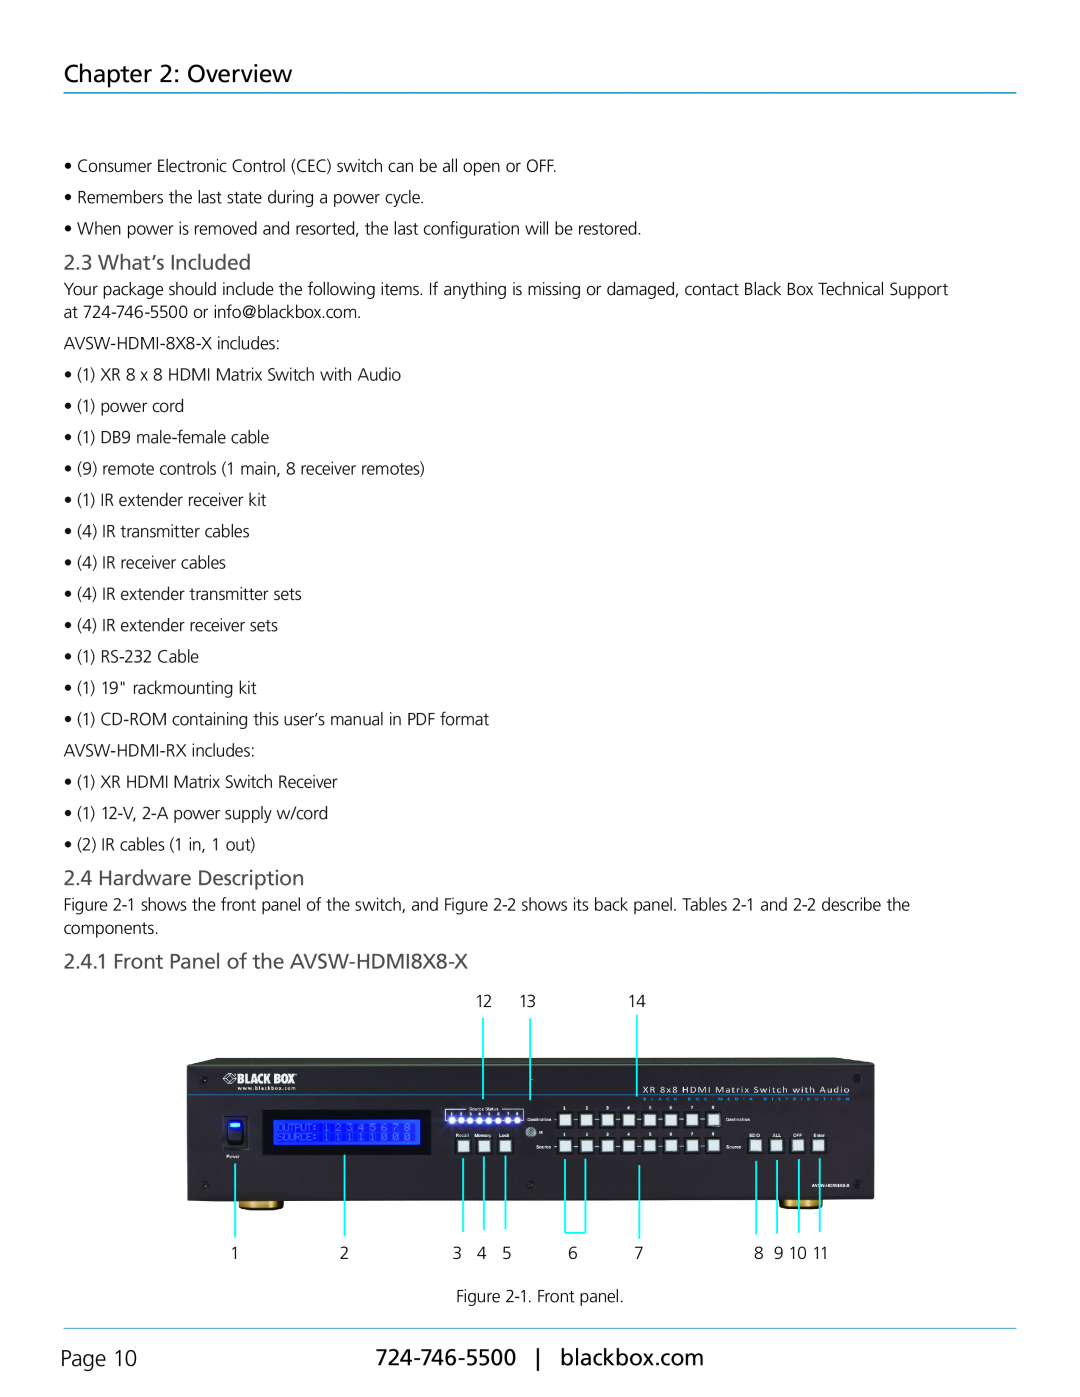 Black Box AVSW-HDMI-RX manual What’s Included, Hardware Description, Front Panel of the AVSW-HDMI8X8-X, Overview, Page 